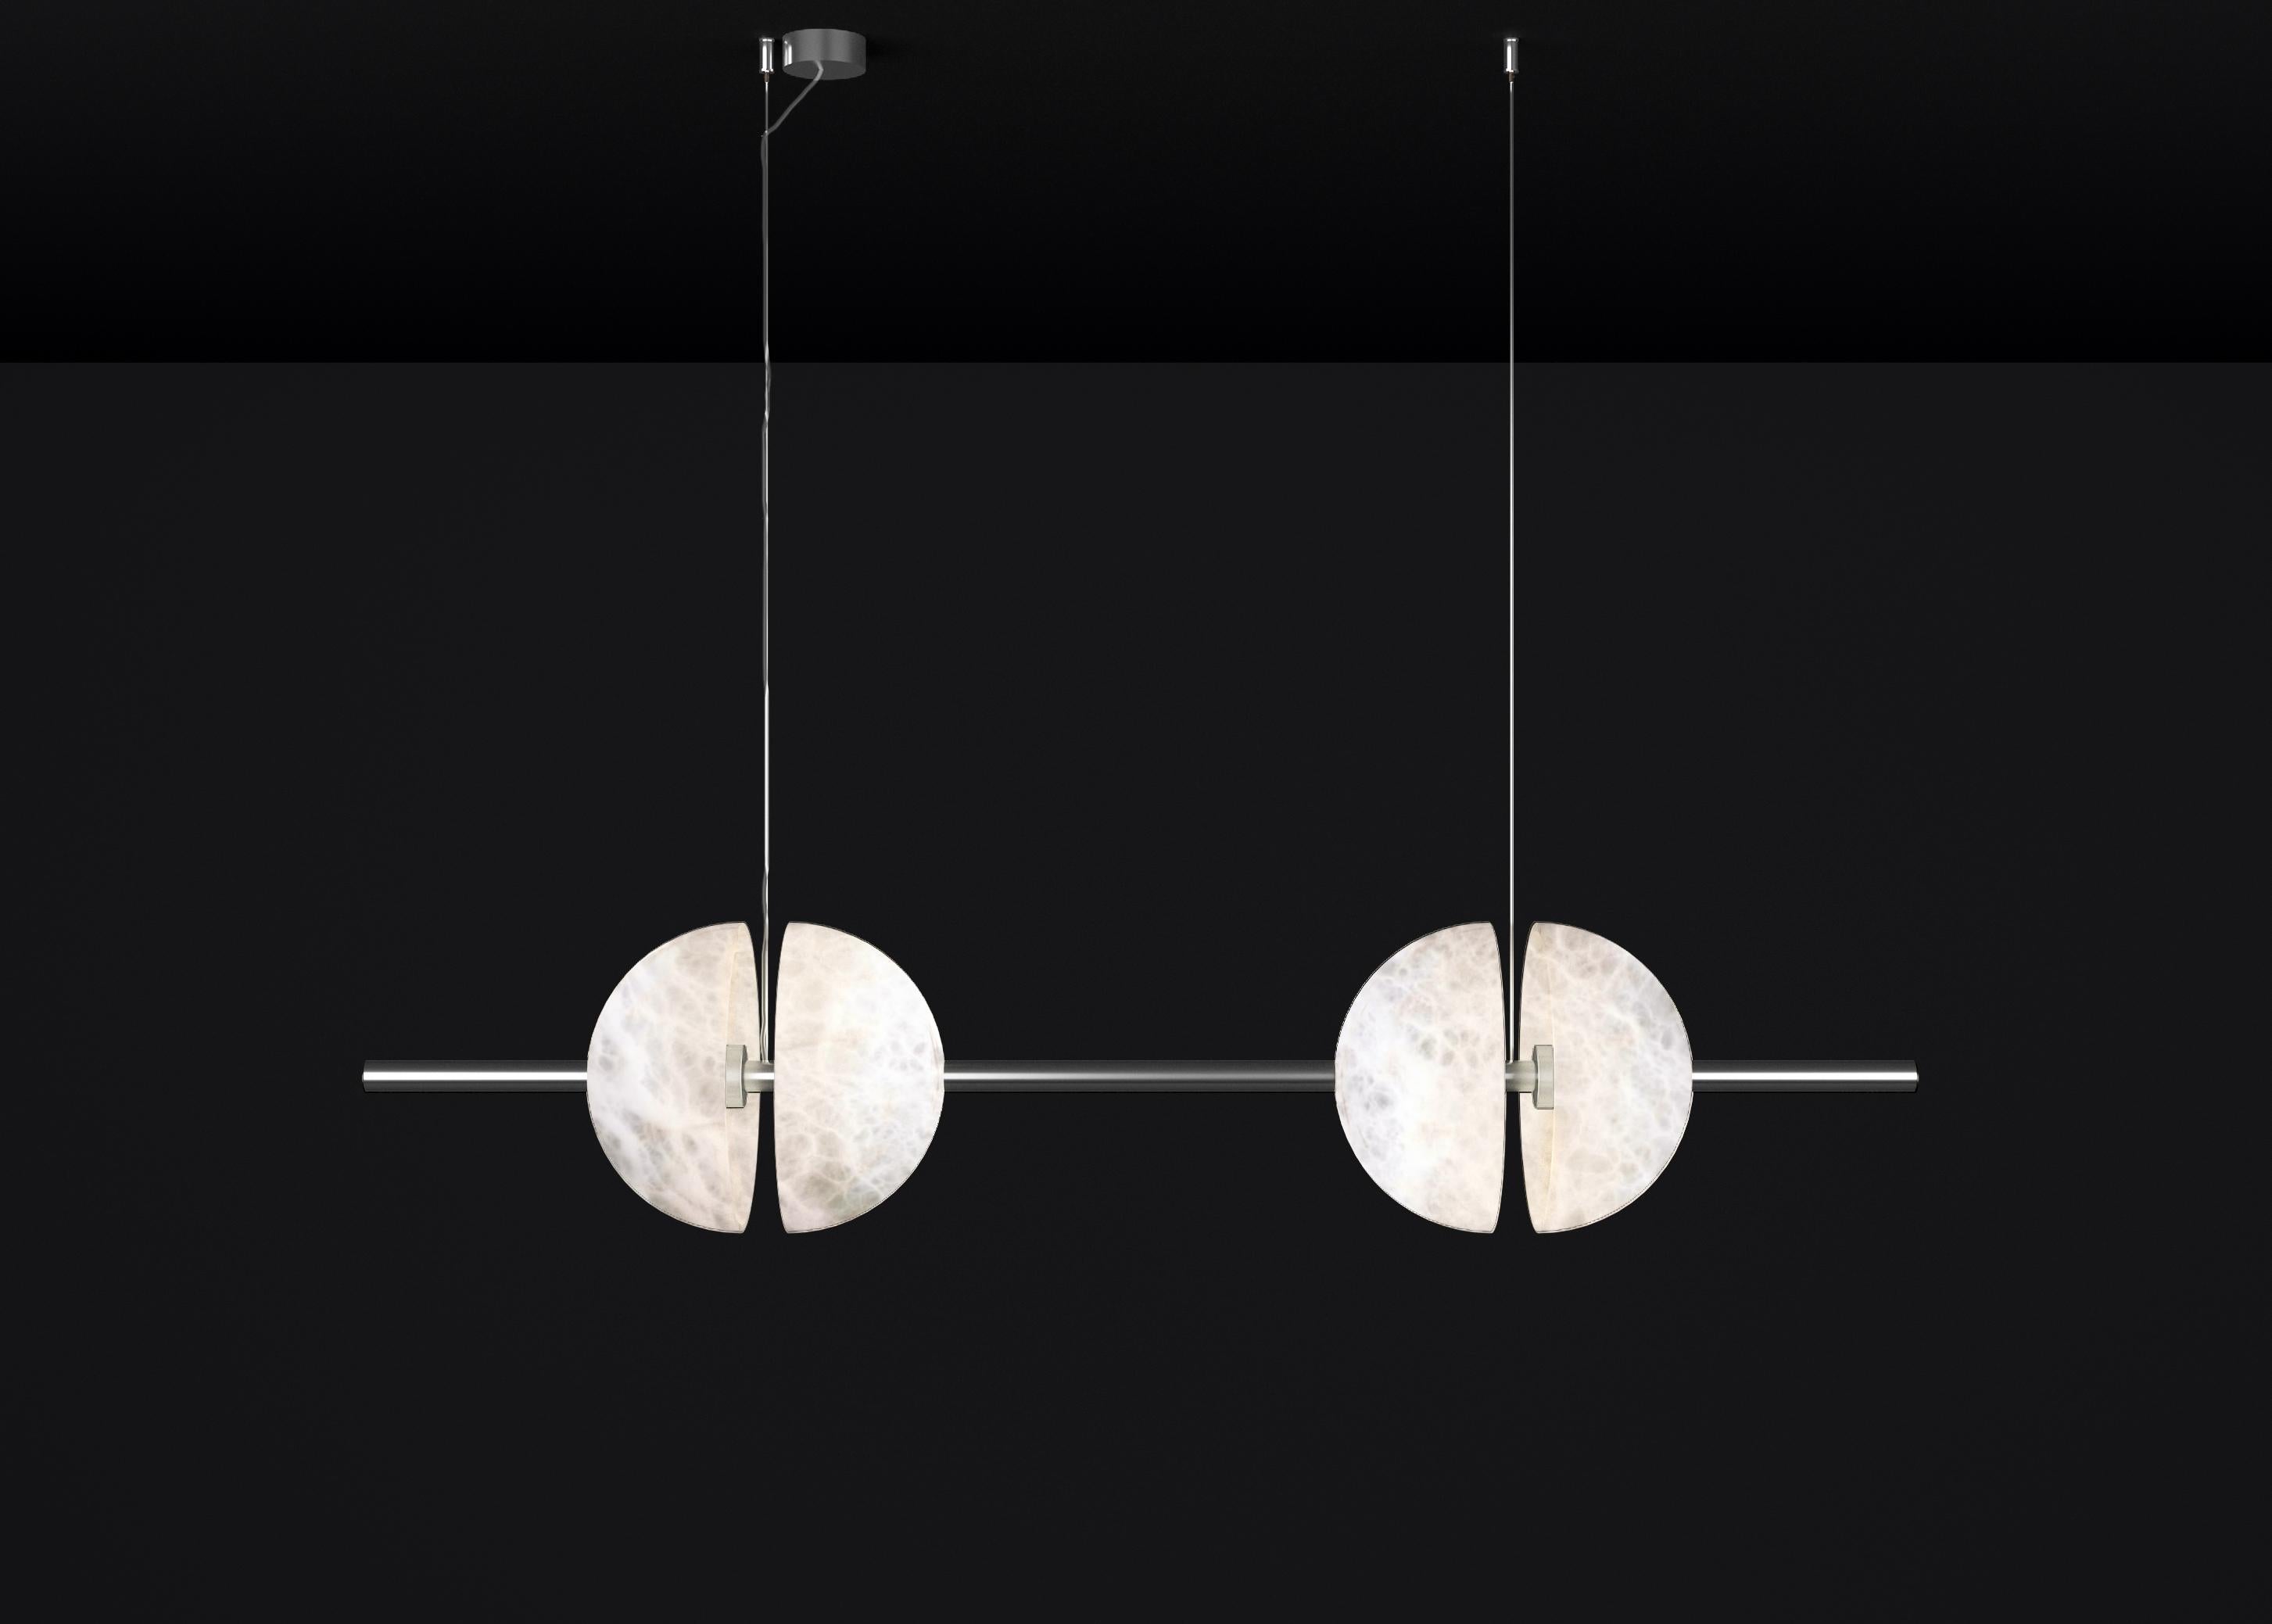 Ermes Shiny Silver Metal And Alabaster Pendant Light 1 by Alabastro Italiano
Dimensions: D 30 x W 150 x H 300 cm.
Materials: White alabaster and shiny silver metal.

Available in different finishes: Shiny Silver, Bronze, Brushed Brass, Ruggine of